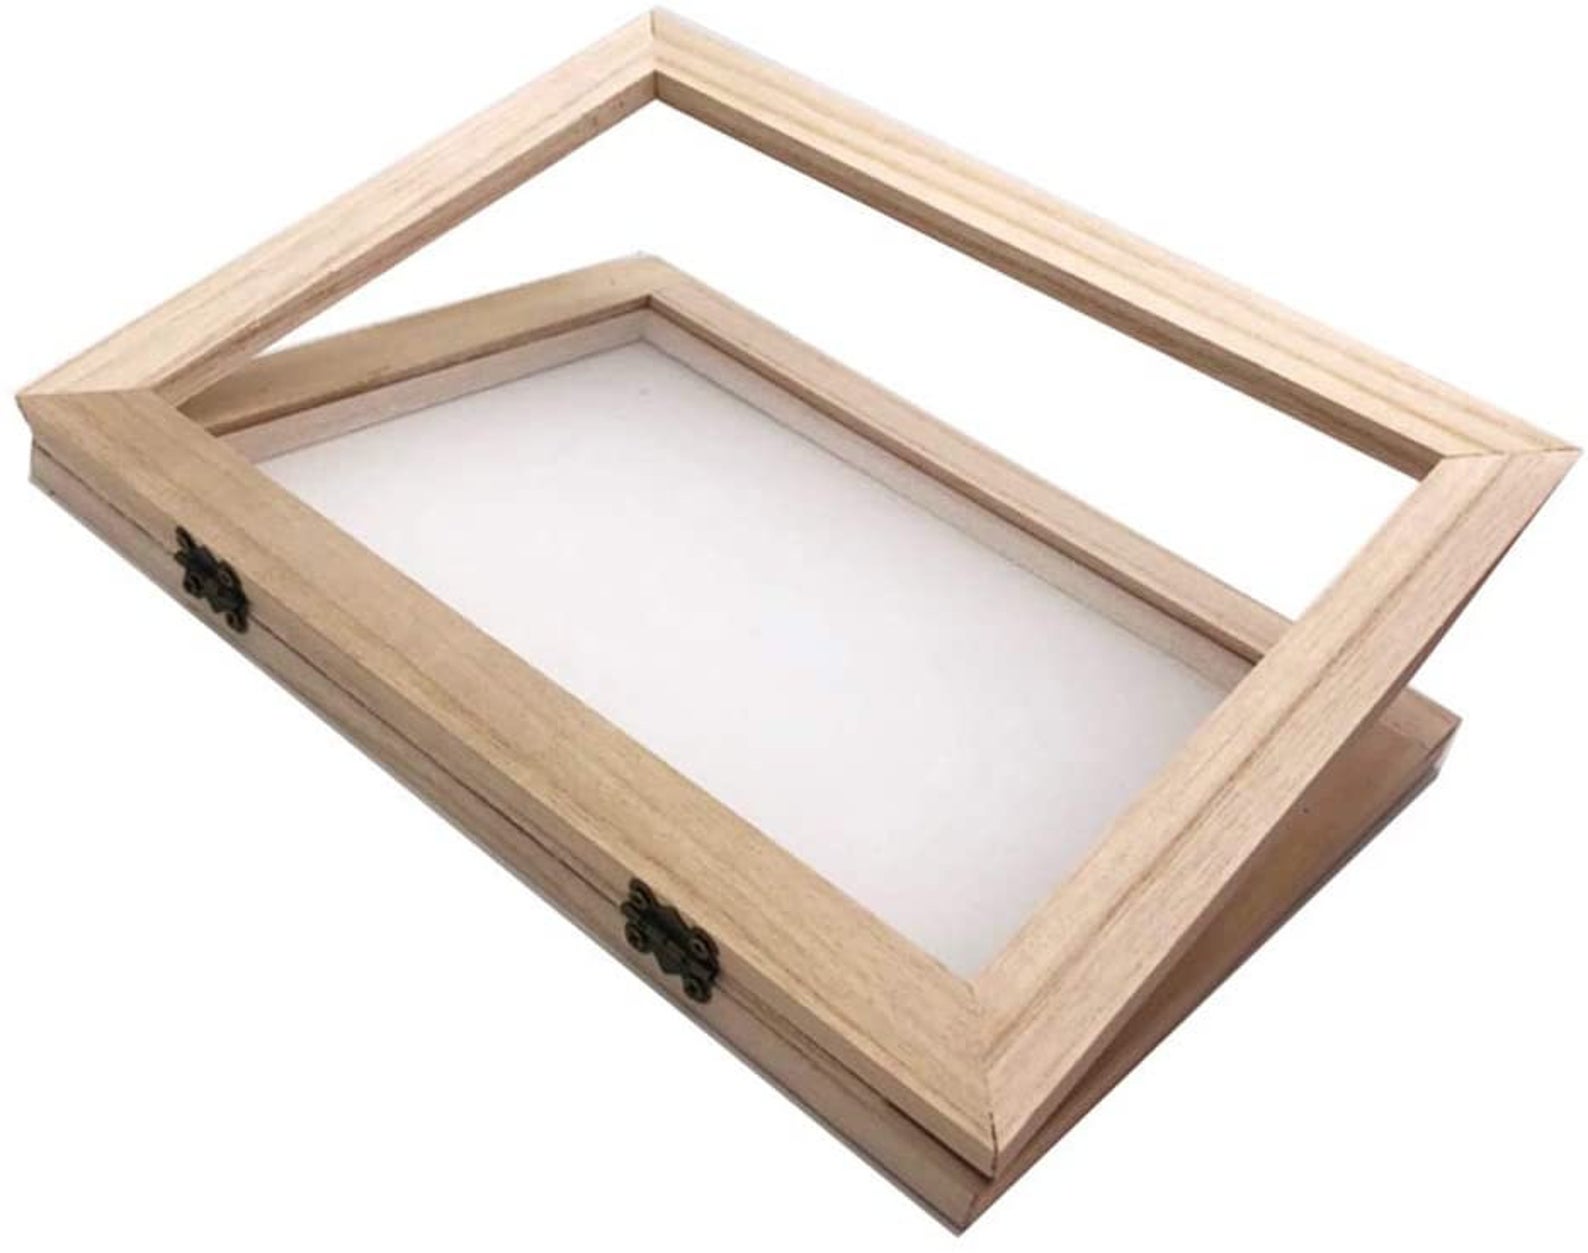 High quality wooden frame for paper making, Etsy